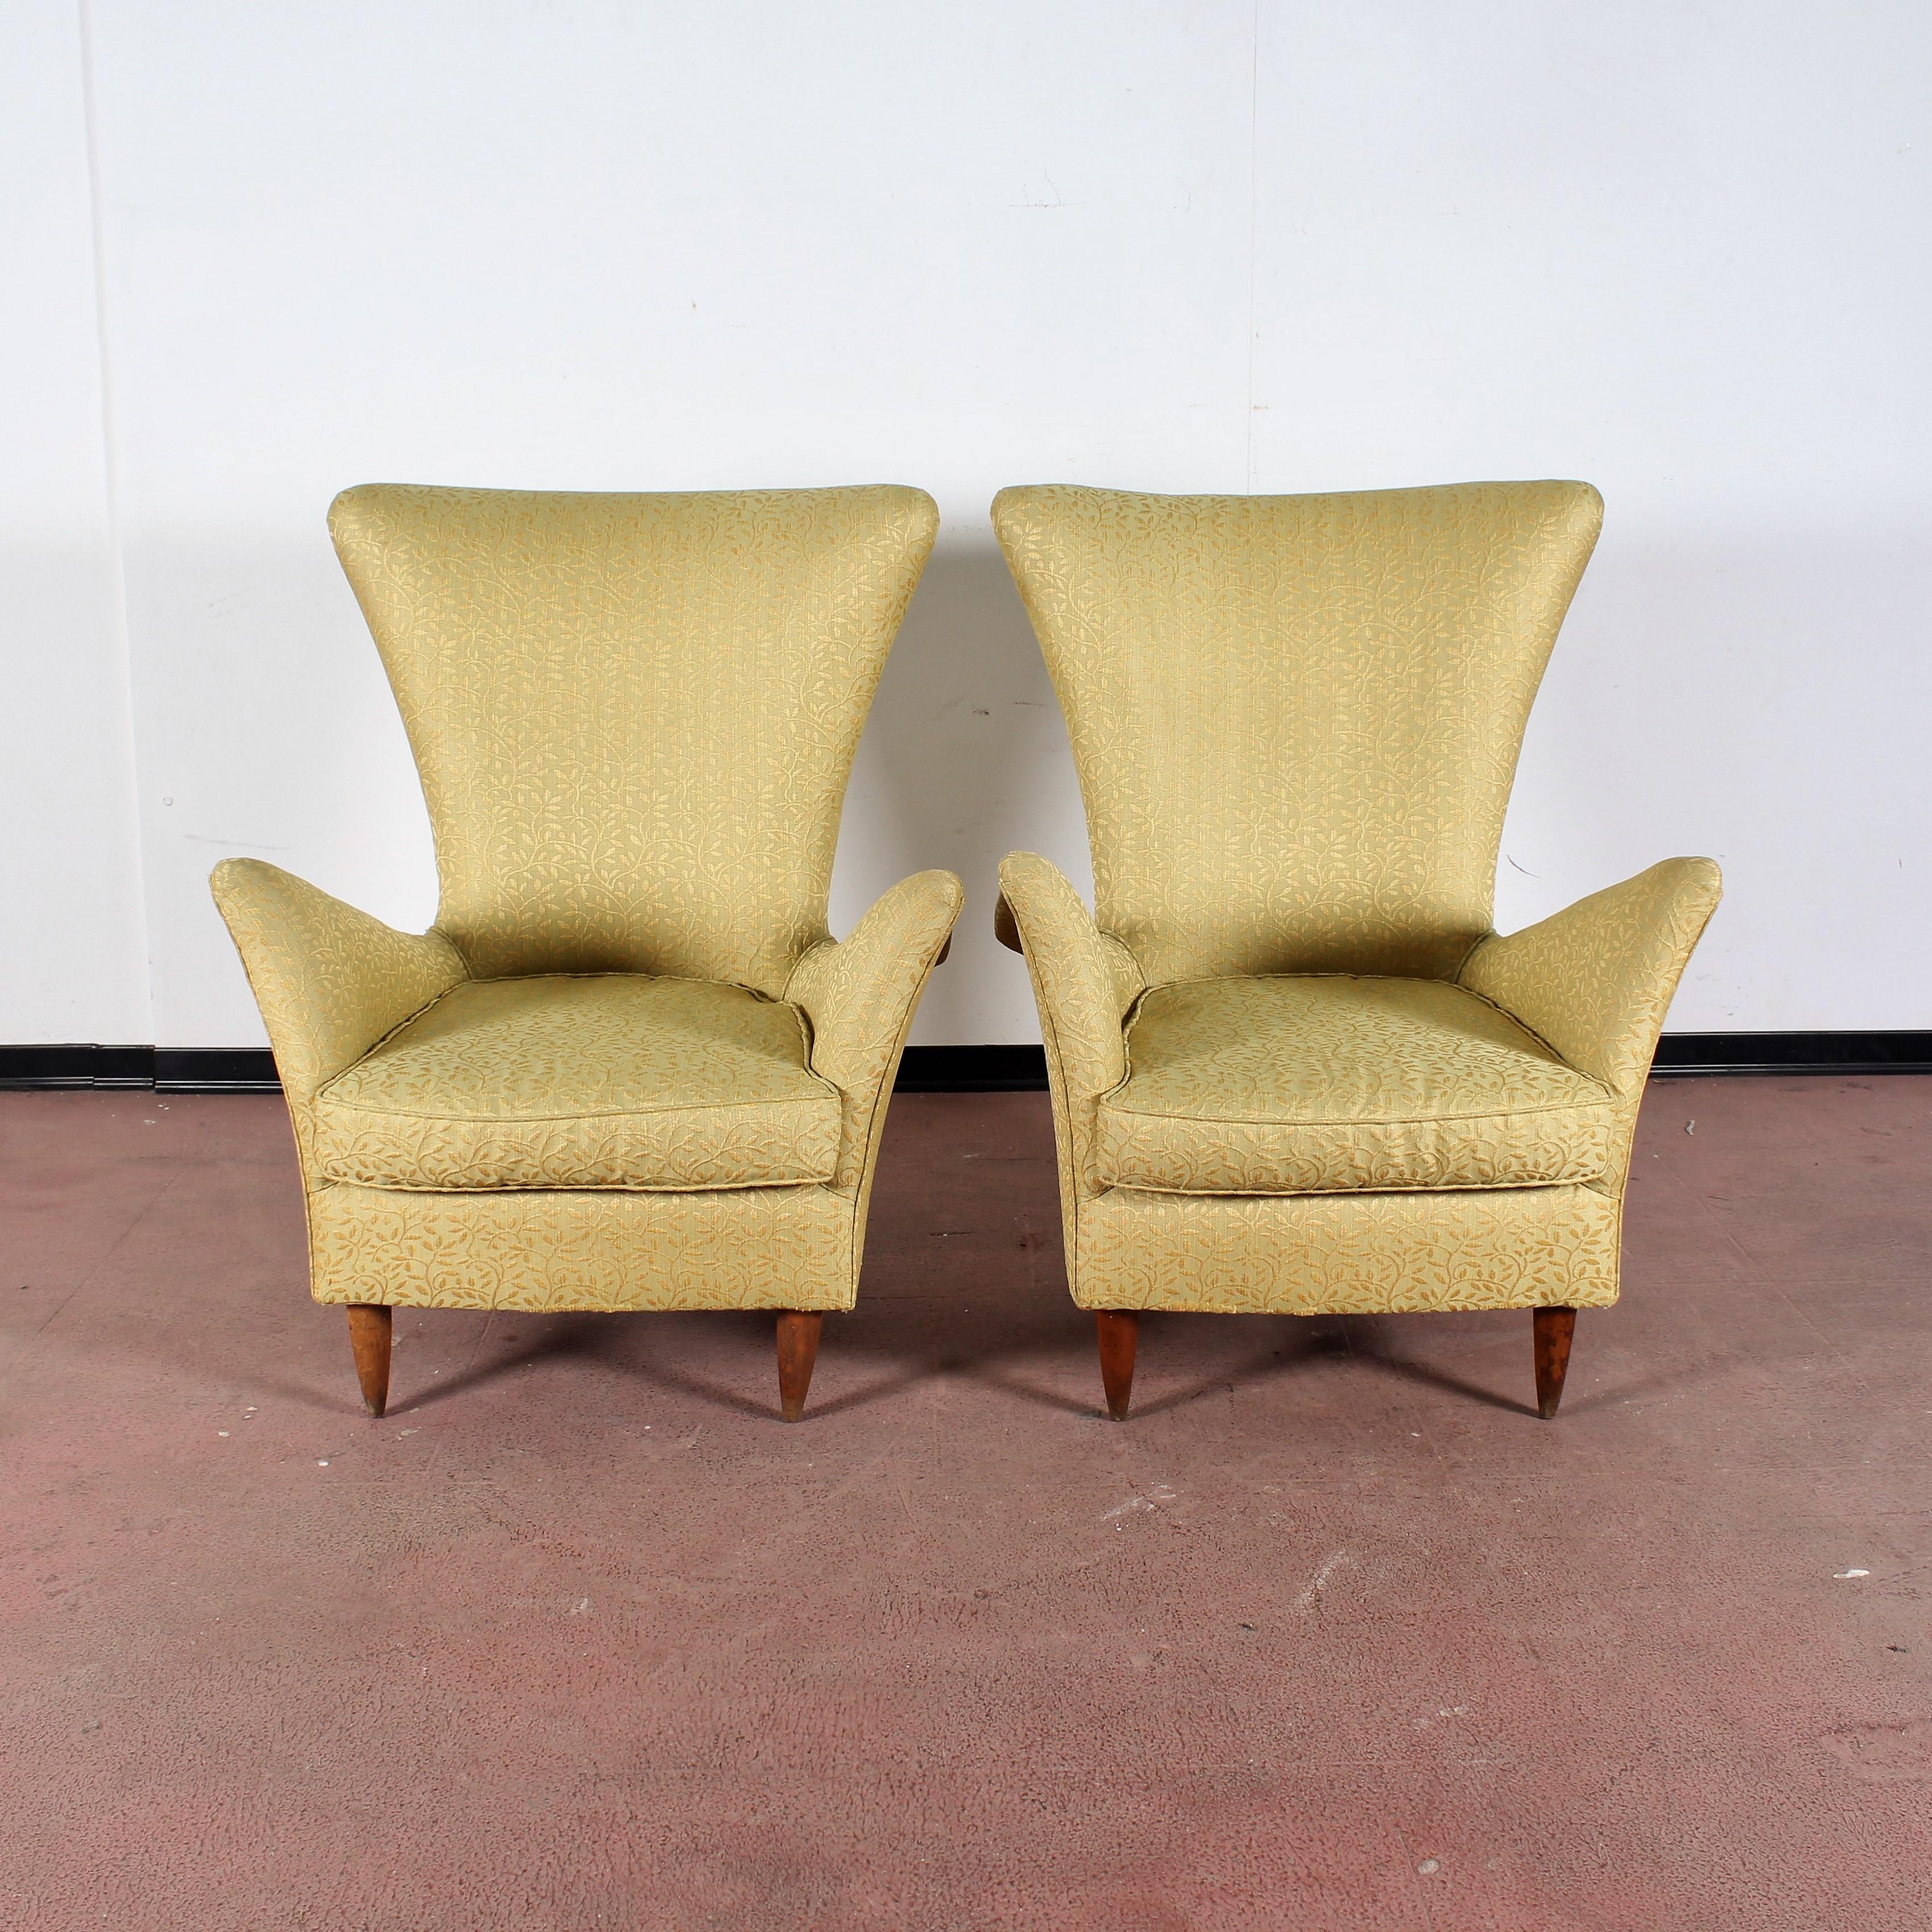 Set of two armchairs with wooden structure, gold yellow fabric covering with foliage motifs, and conical feet. Gio Ponti style, Italian manufacture in 1950s
Wear consistent with age and use.
 